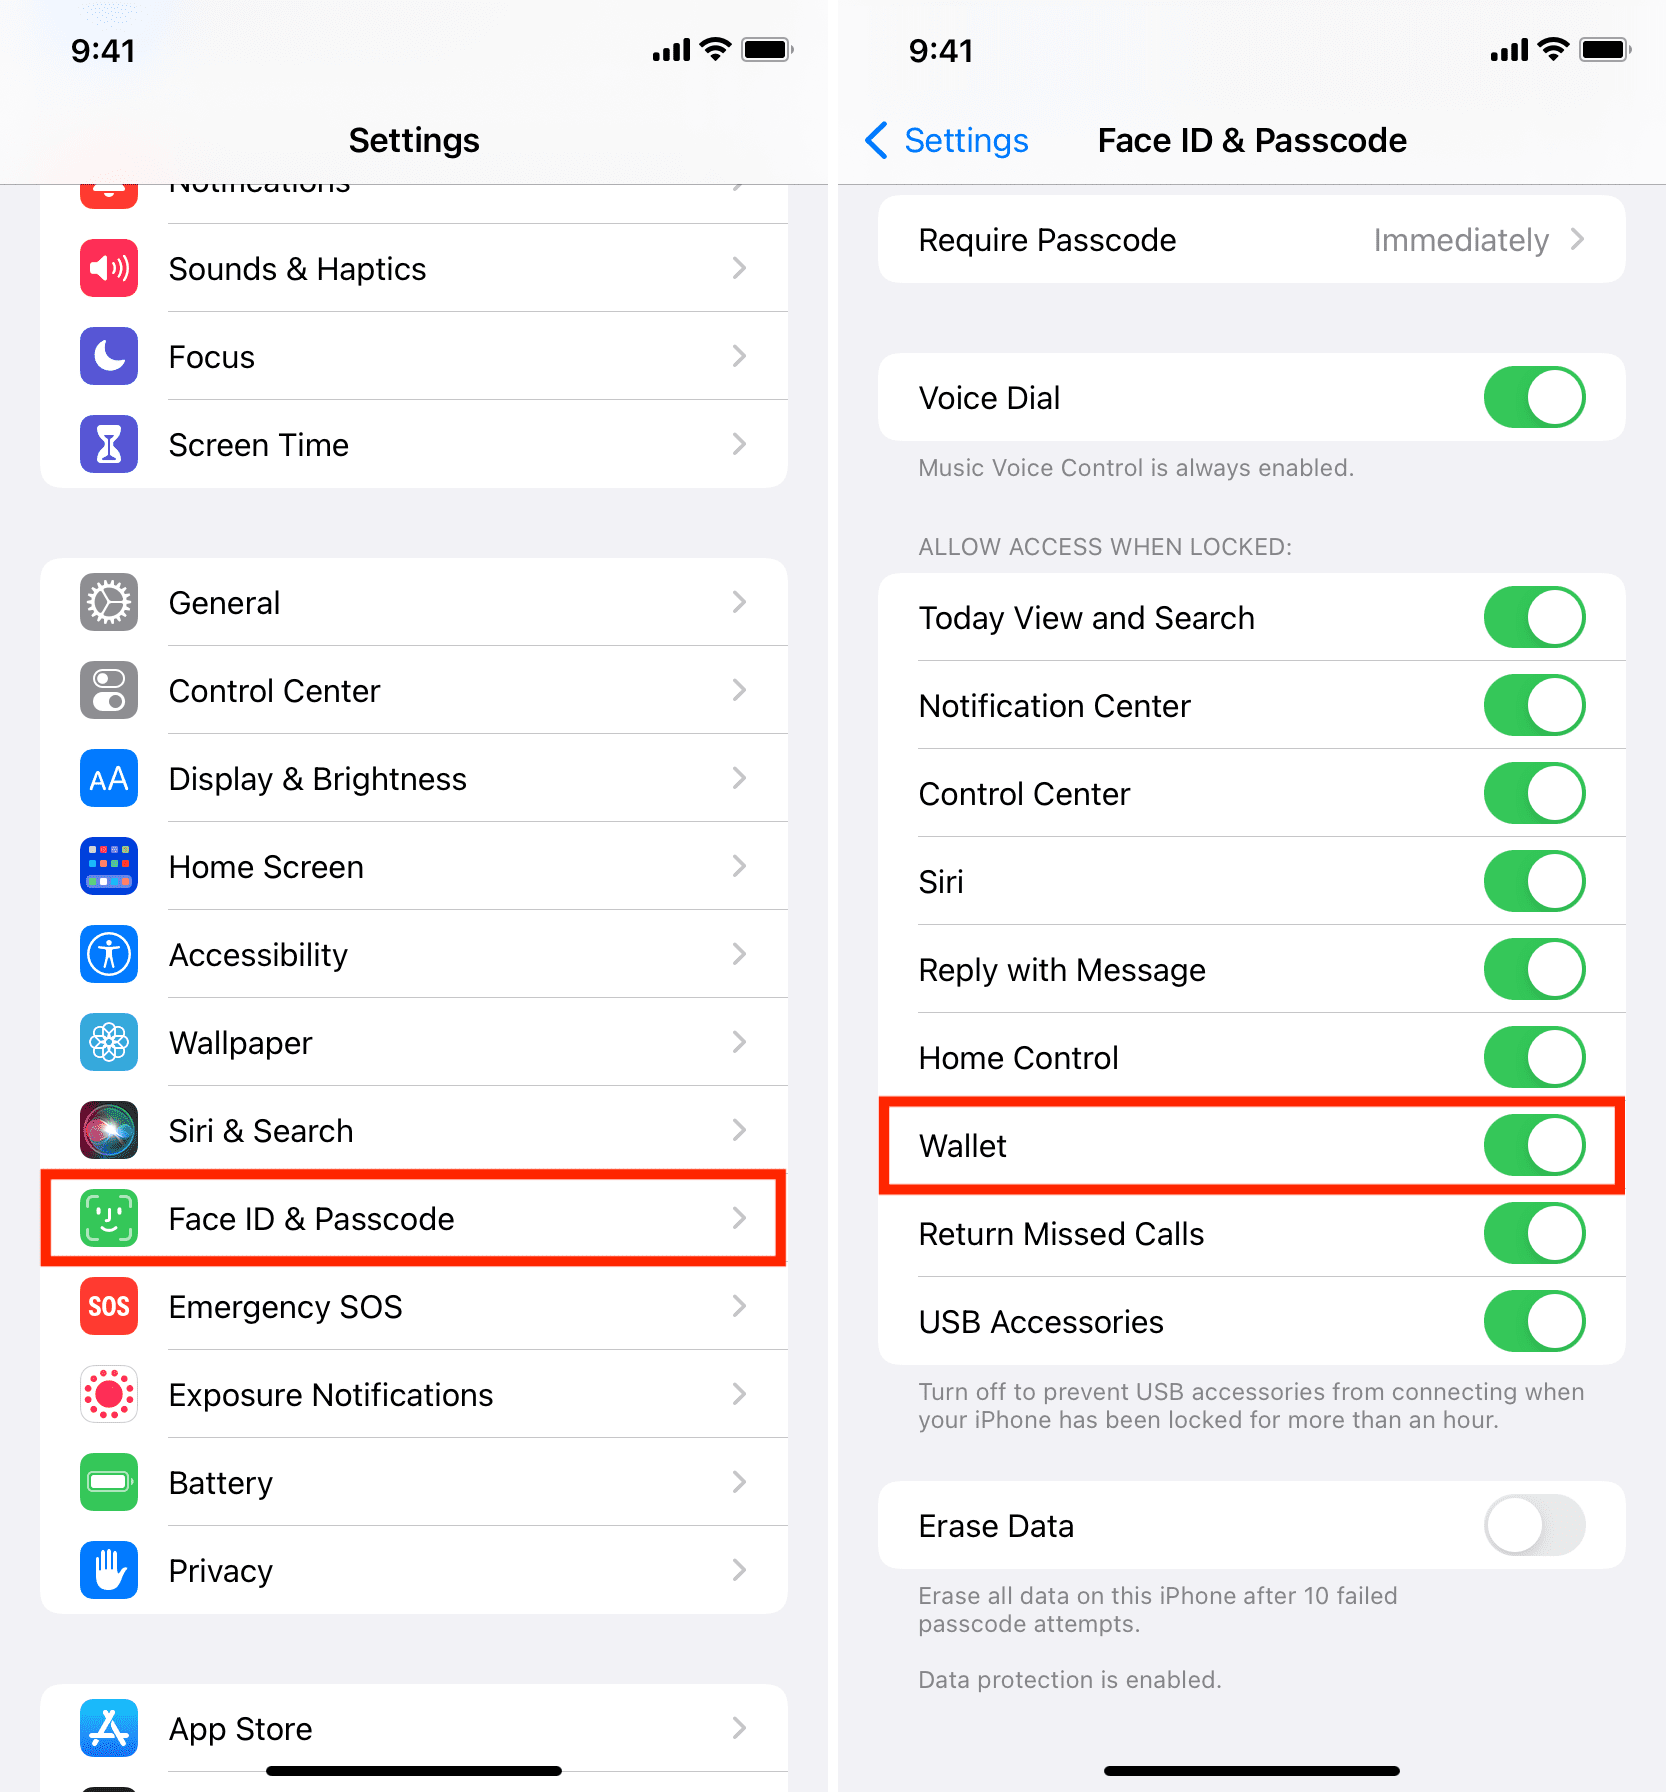 Enable Wallet access on Lock Screen under Face ID and Passcode settings on iPhone